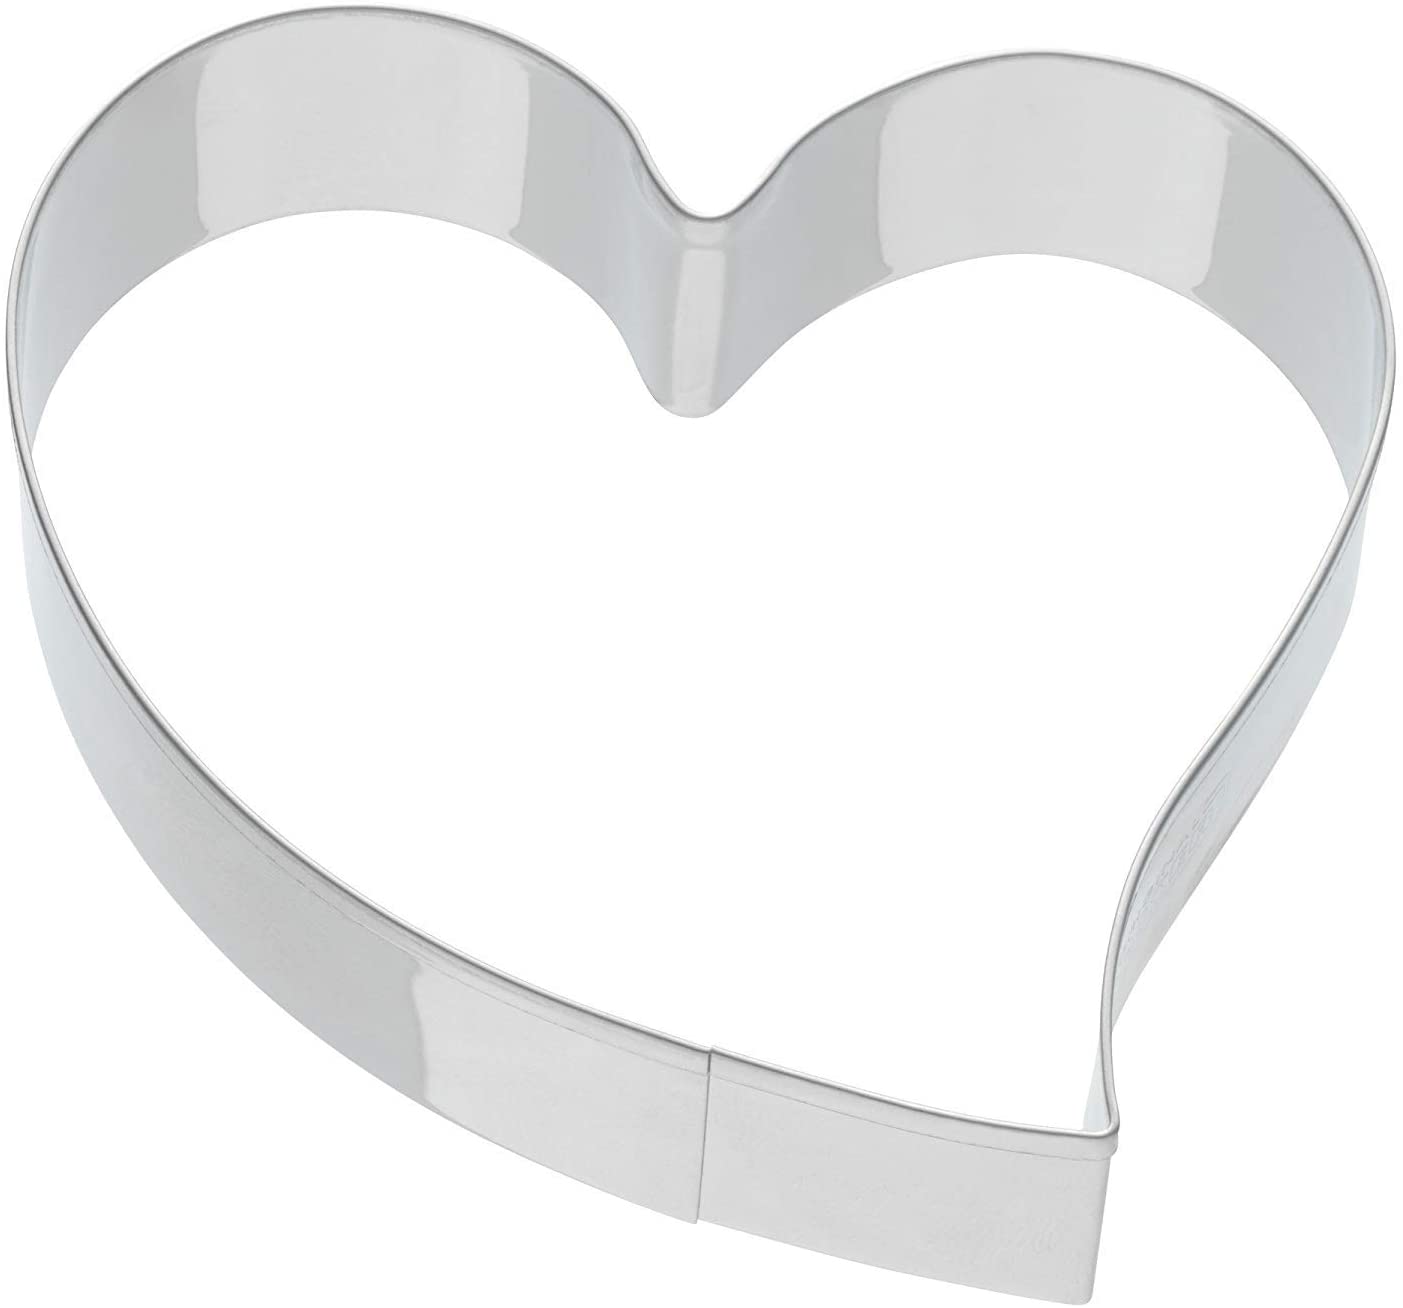 Kaiser \'2300604824 All Season Cookie Cutters Alles Liebe. – Stainless Steel Curved Heart, Clear, 8 x 8 x 2.5 cm